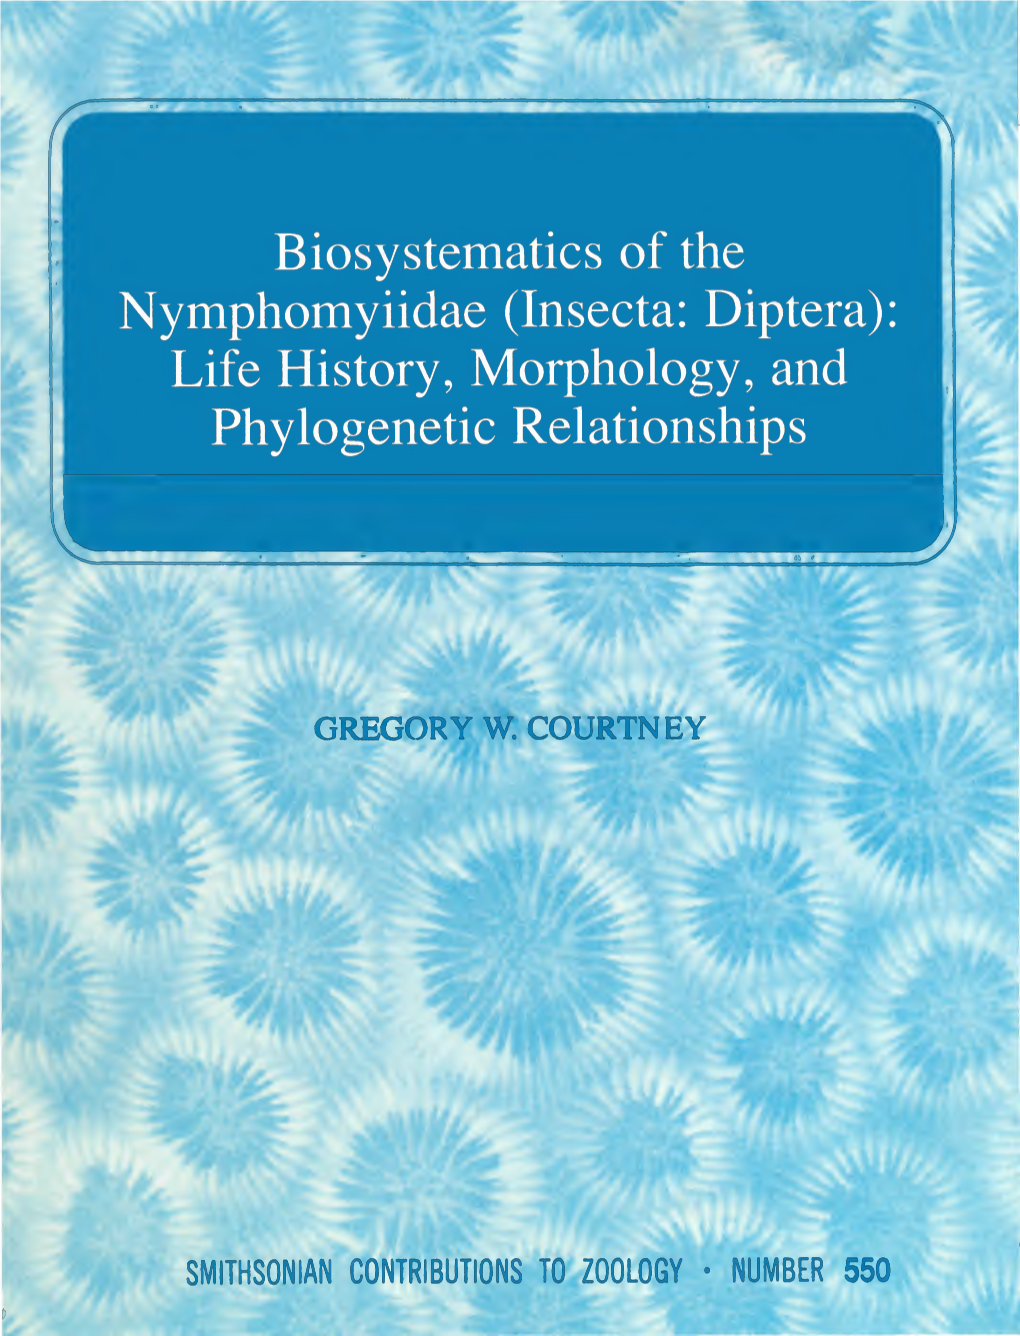 (Insecta: Diptera): Life History, Morphology, and Phylogenetic Relationships